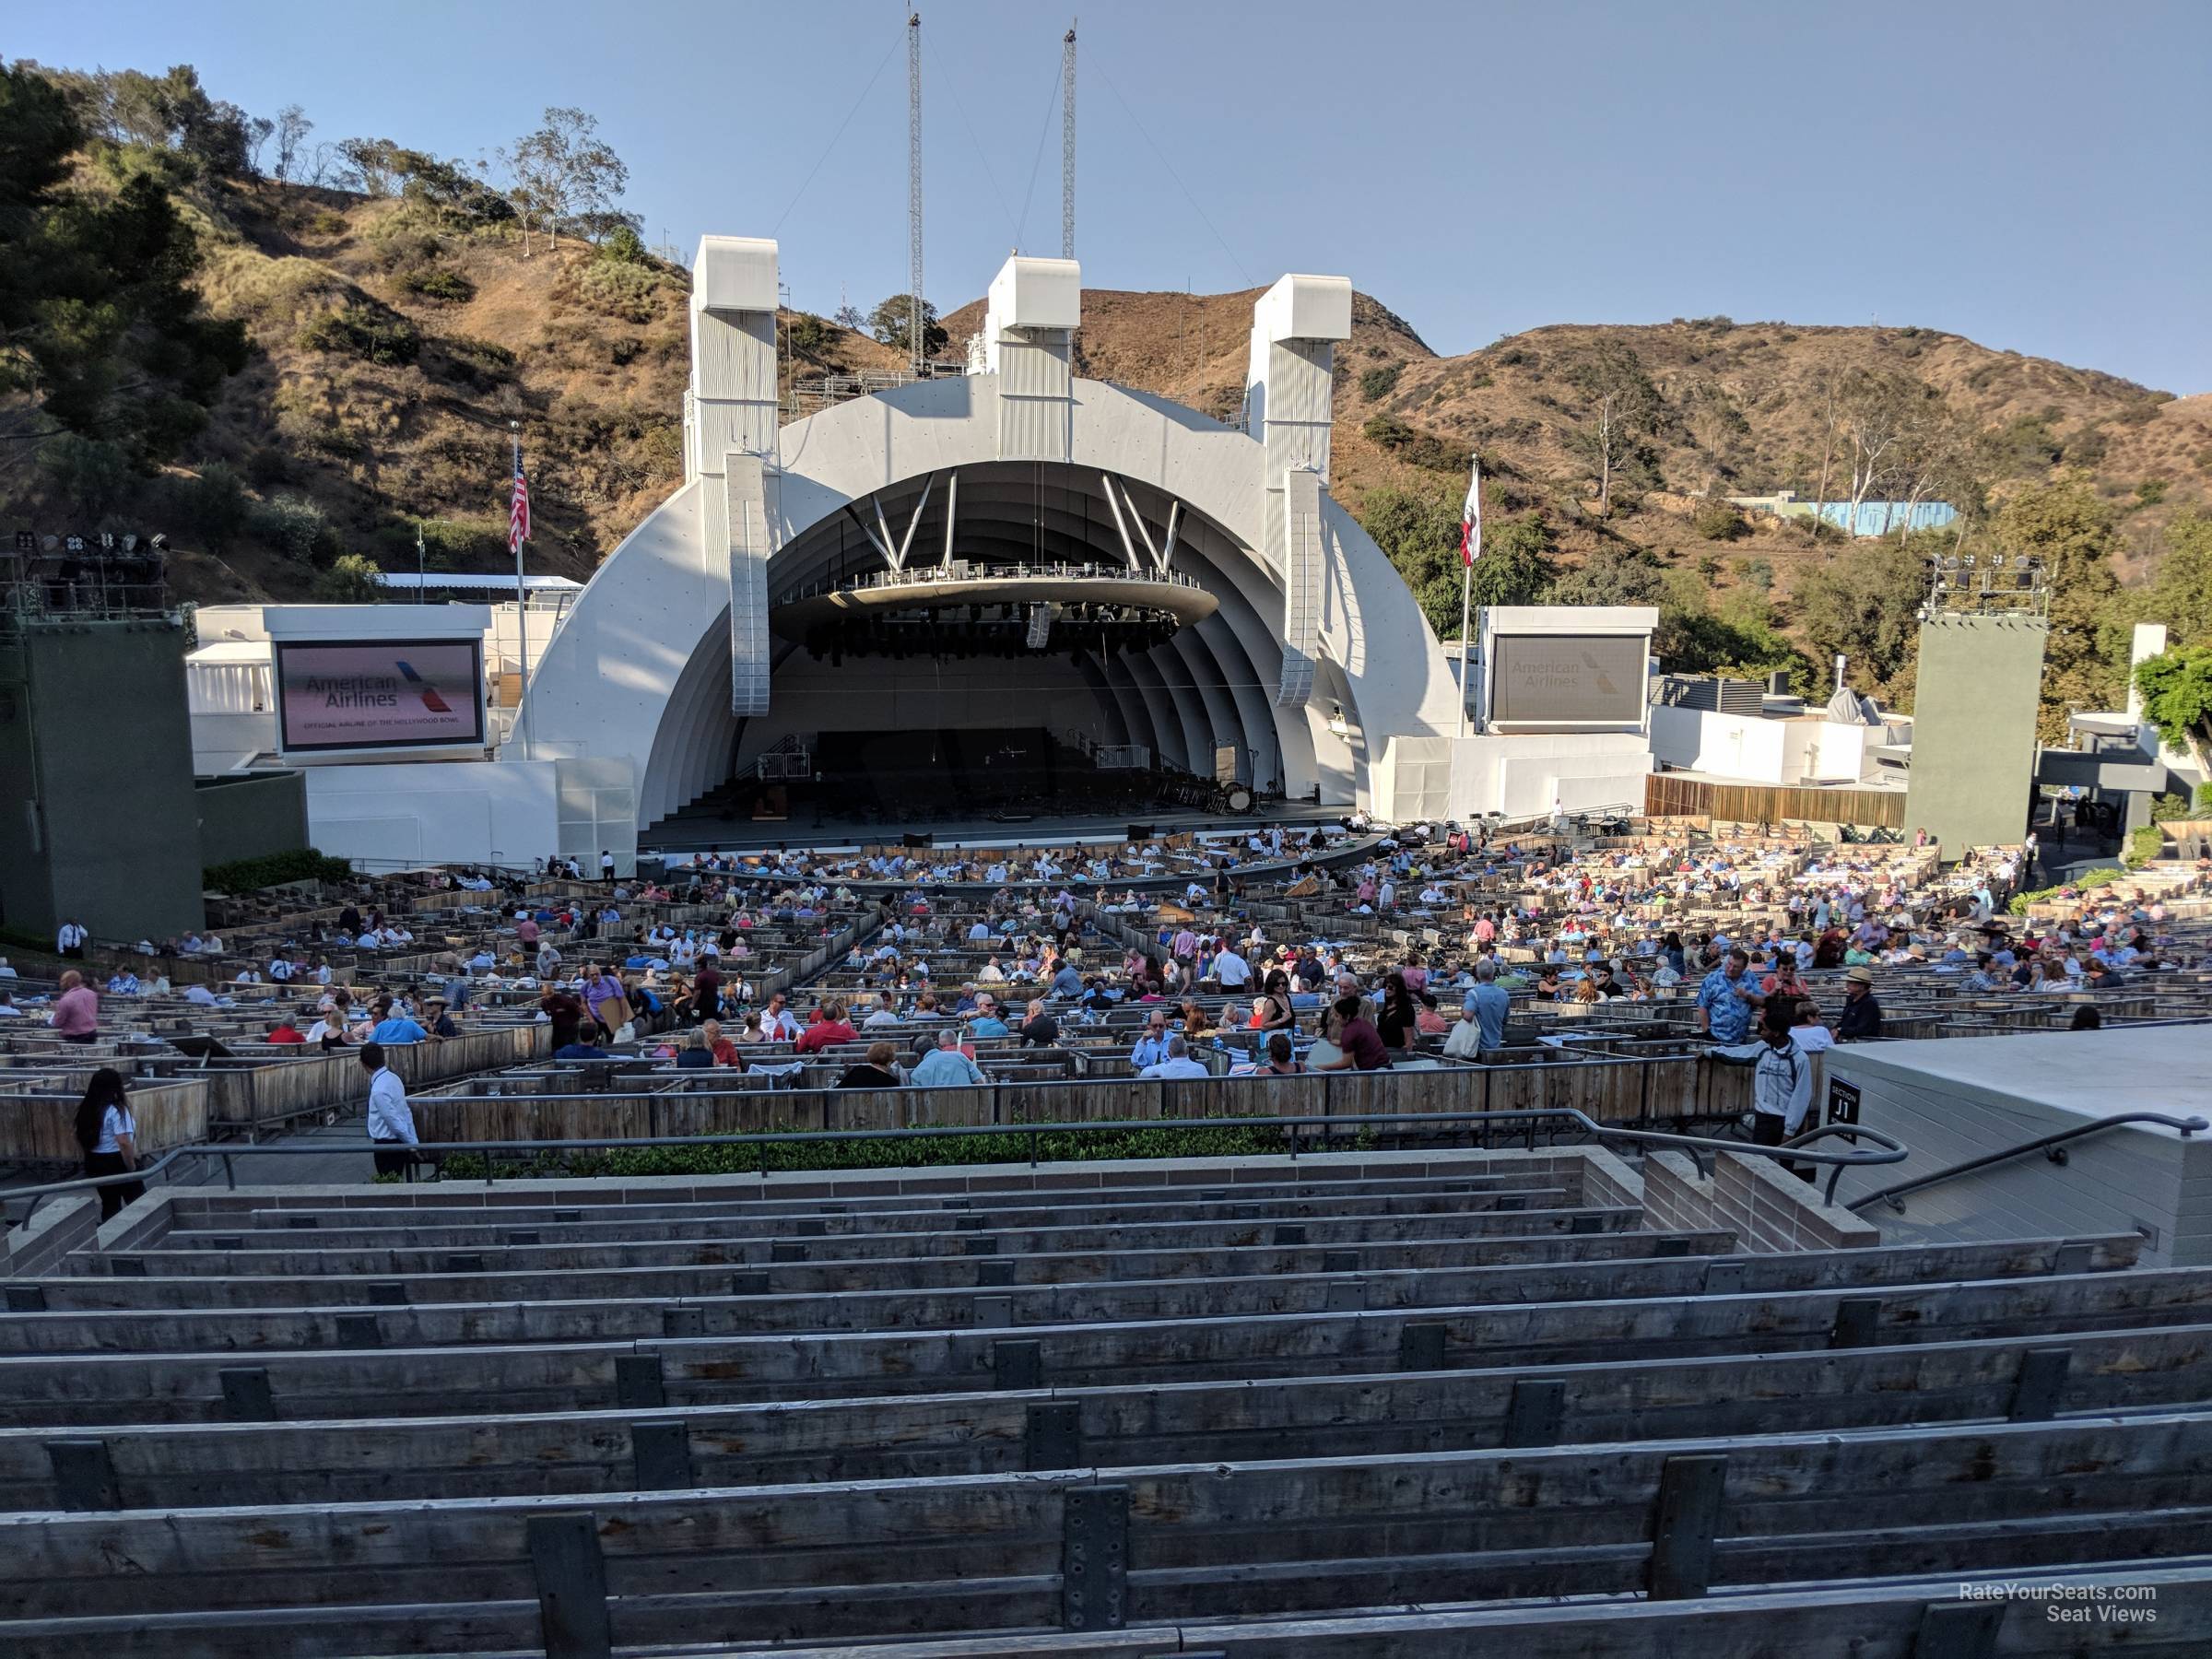 section j2, row 13 seat view  - hollywood bowl